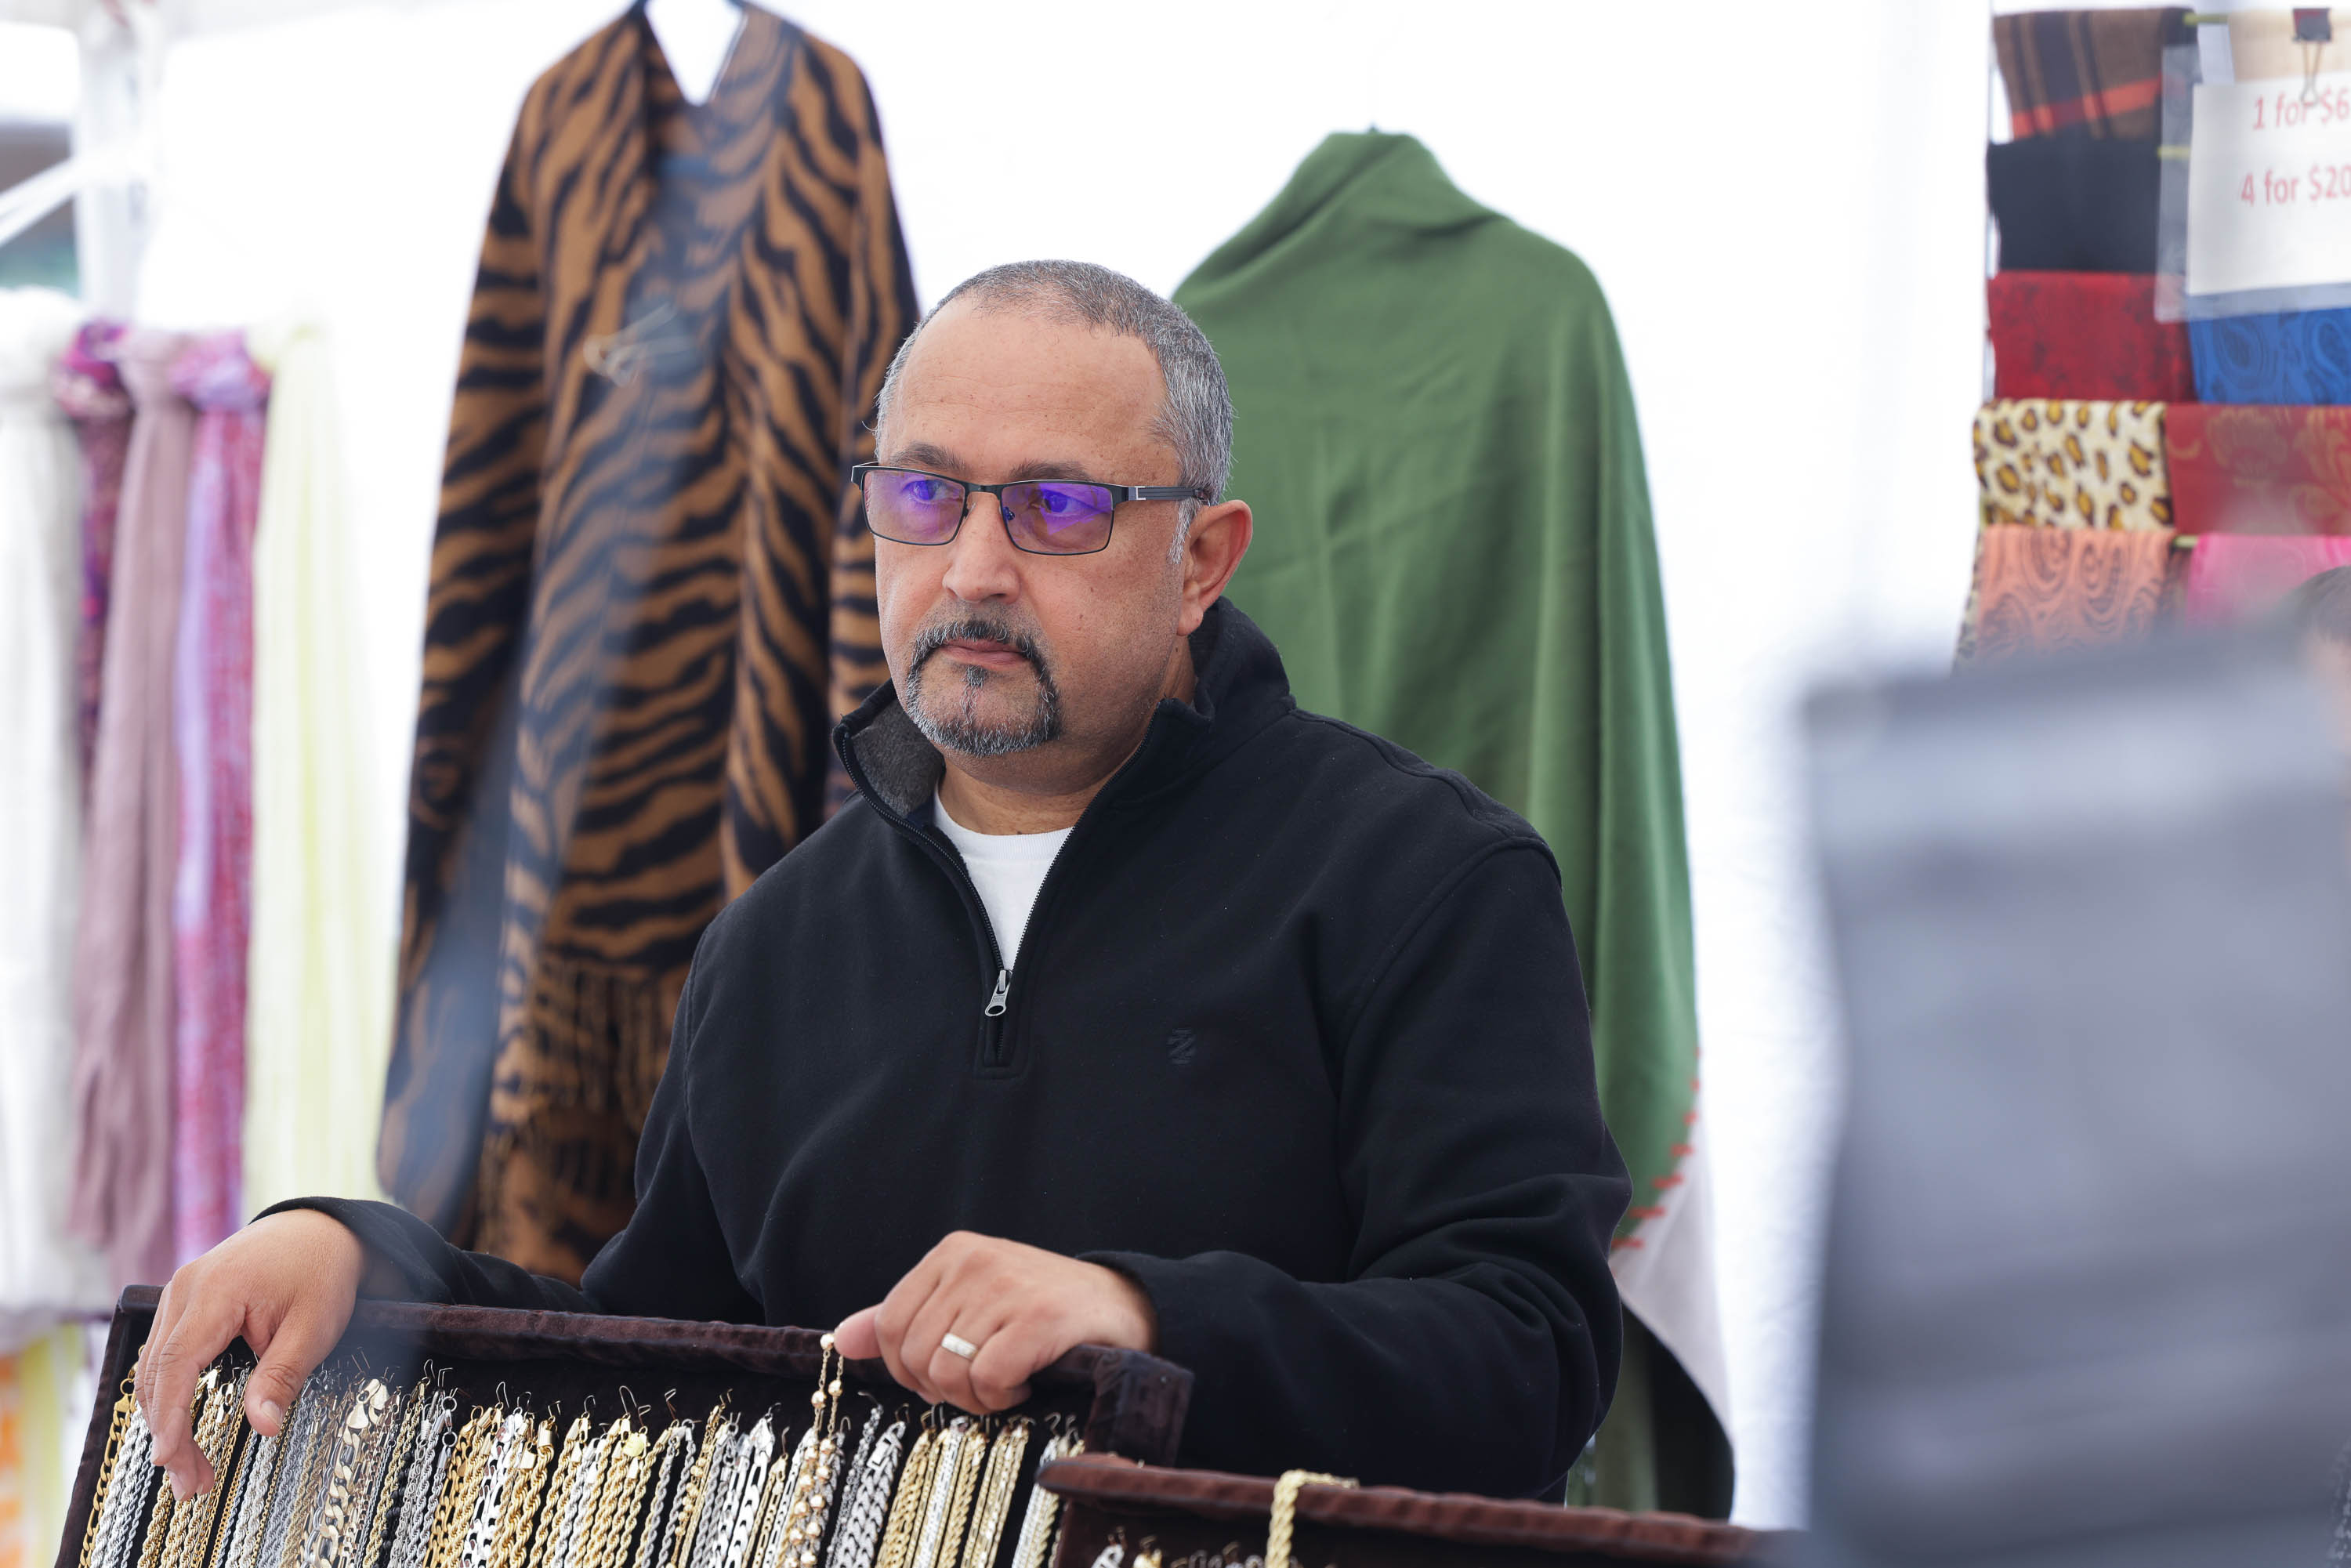 a middle-aged middle eastern man in glasses frowns at a market stall surrounded by apparel